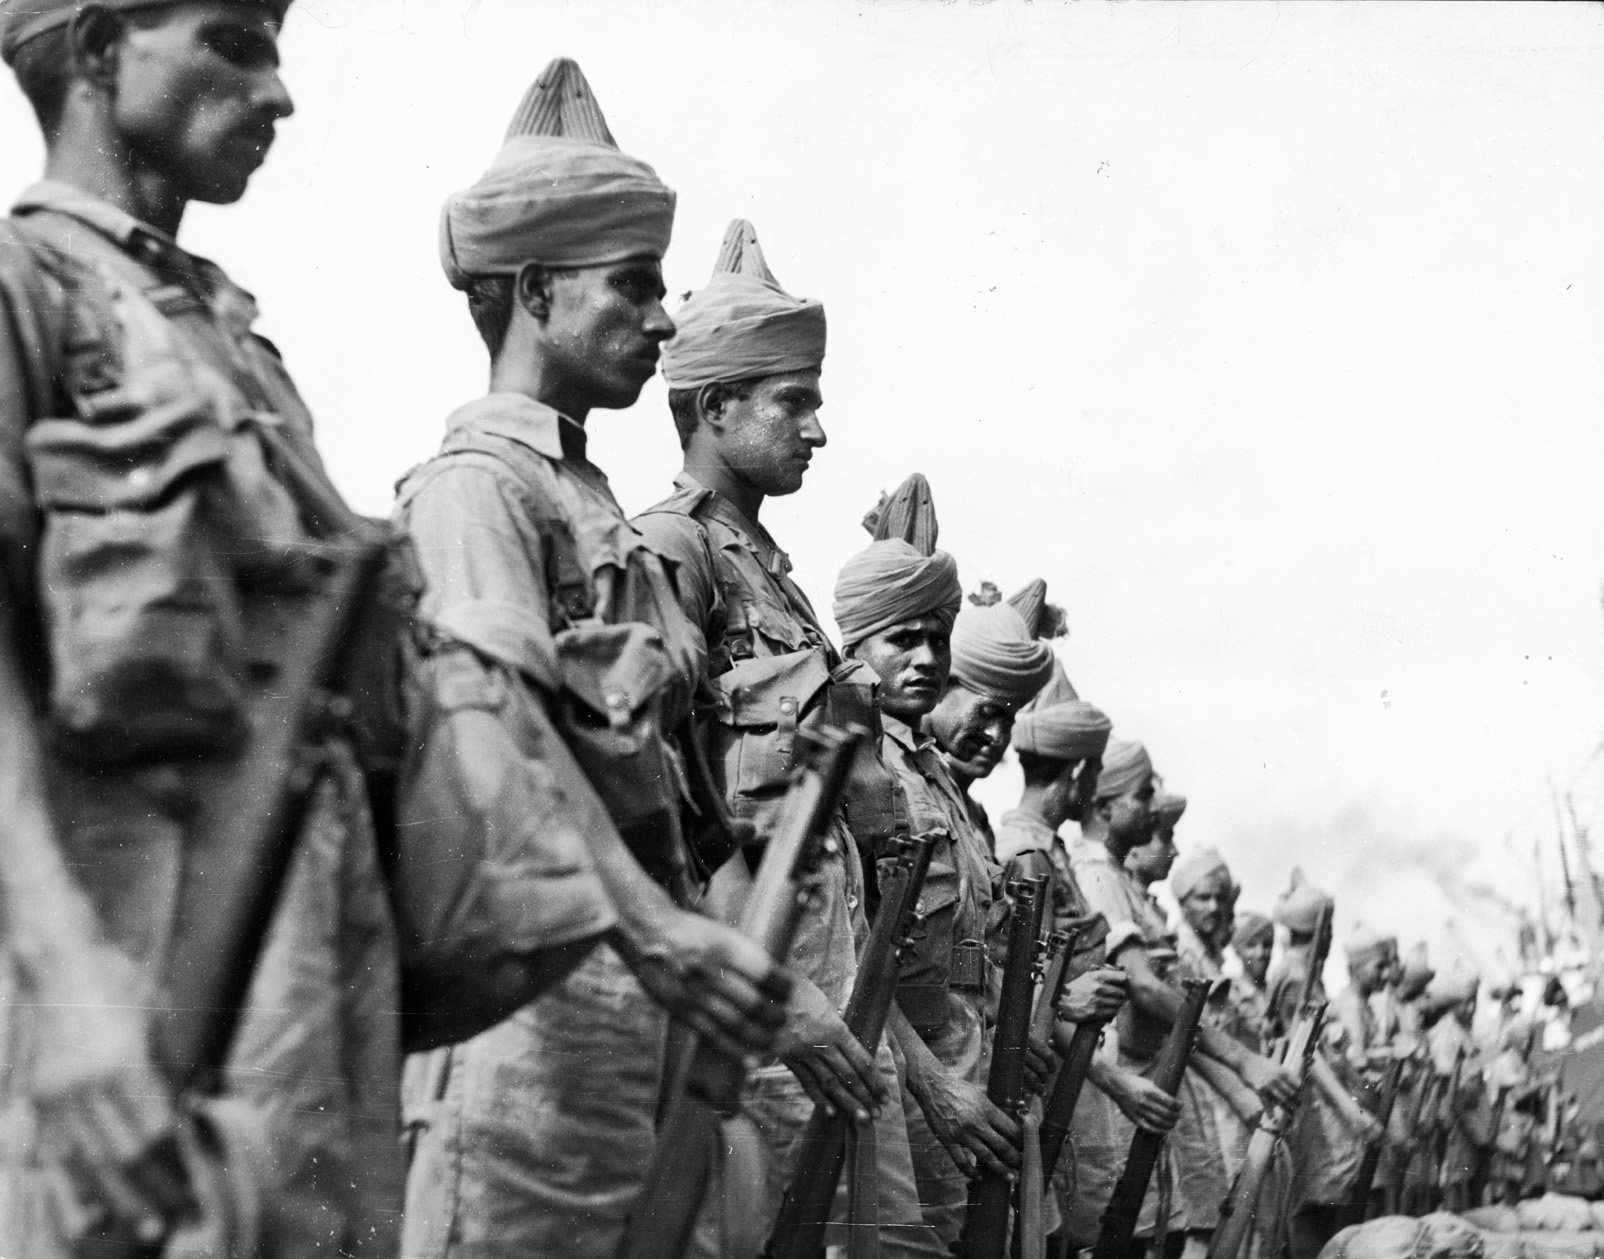 Soldiers of the Indian III Corps stand in ranks. The Indian formations were the primary ground force that opposed the Japanese during the lightning campaign to wrest the Malay Peninsula and the fortress of Singapore from their British and Commonwealth defenders.